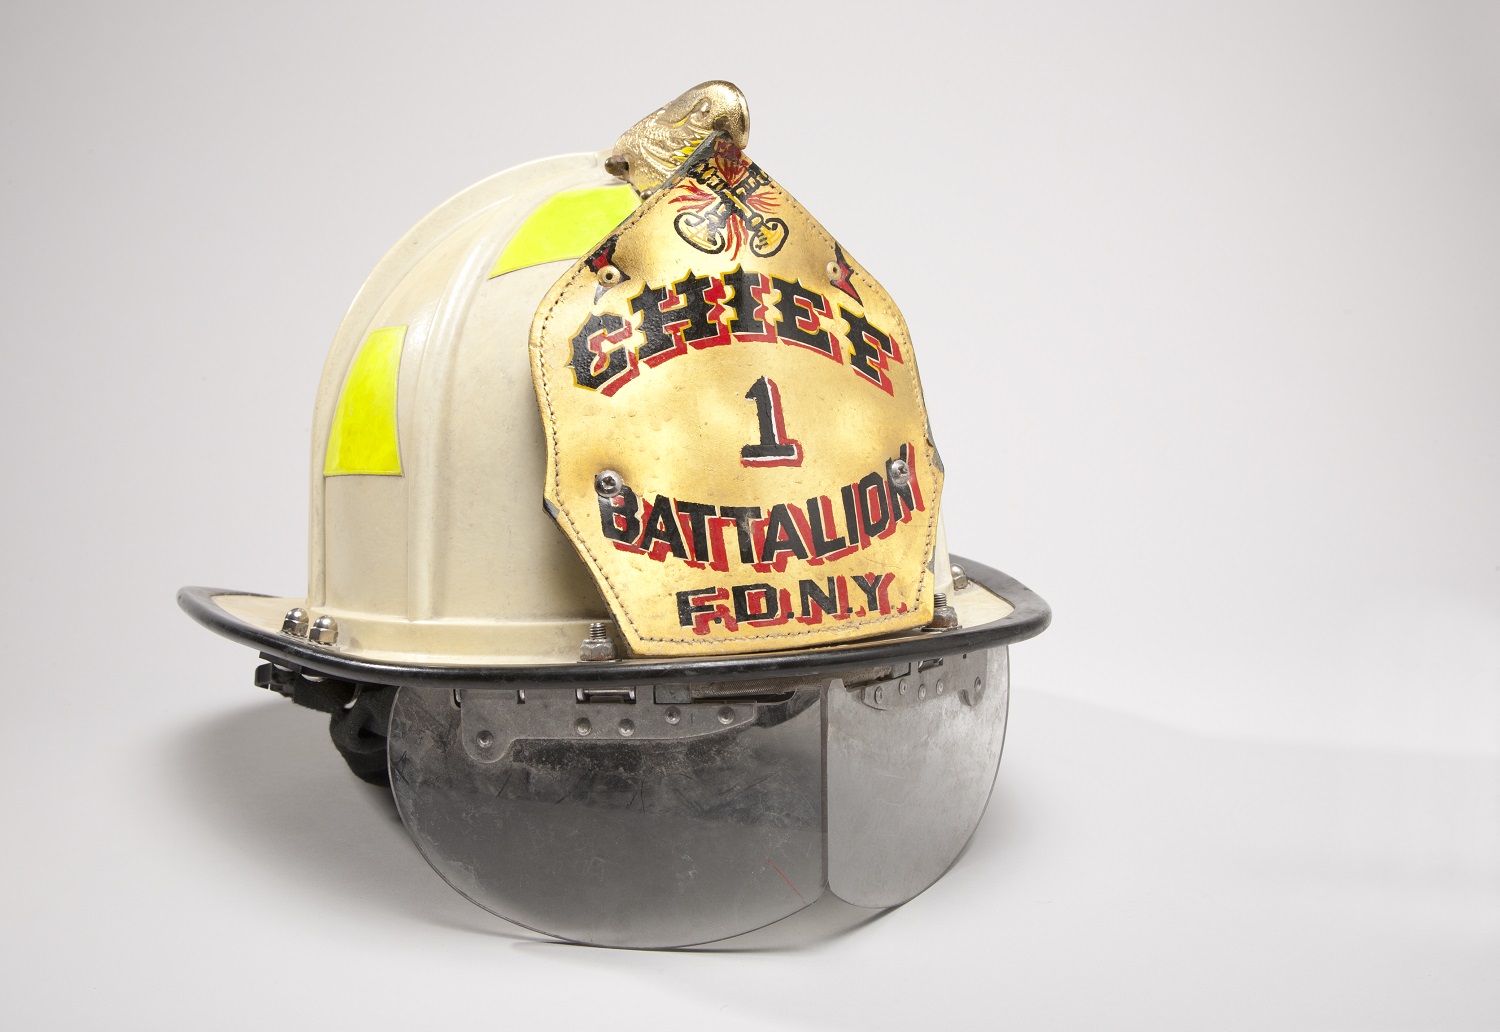 Chief Joseph Pfeifer’s golf-colored fire helmet is displayed on a white surface.